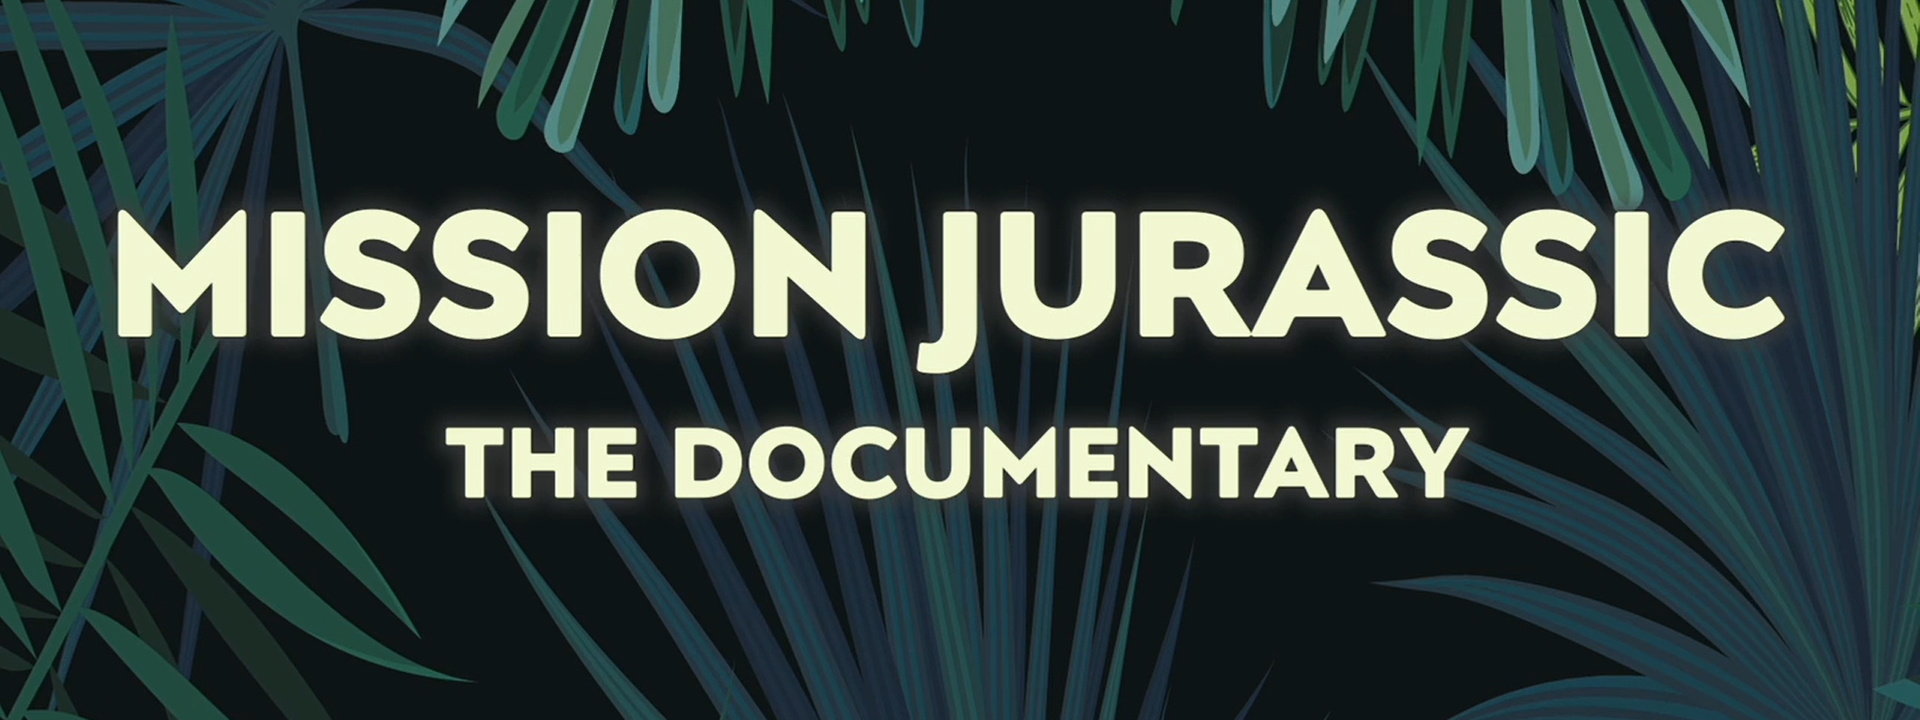 Mission Jurassic: The Documentary Header Graphic